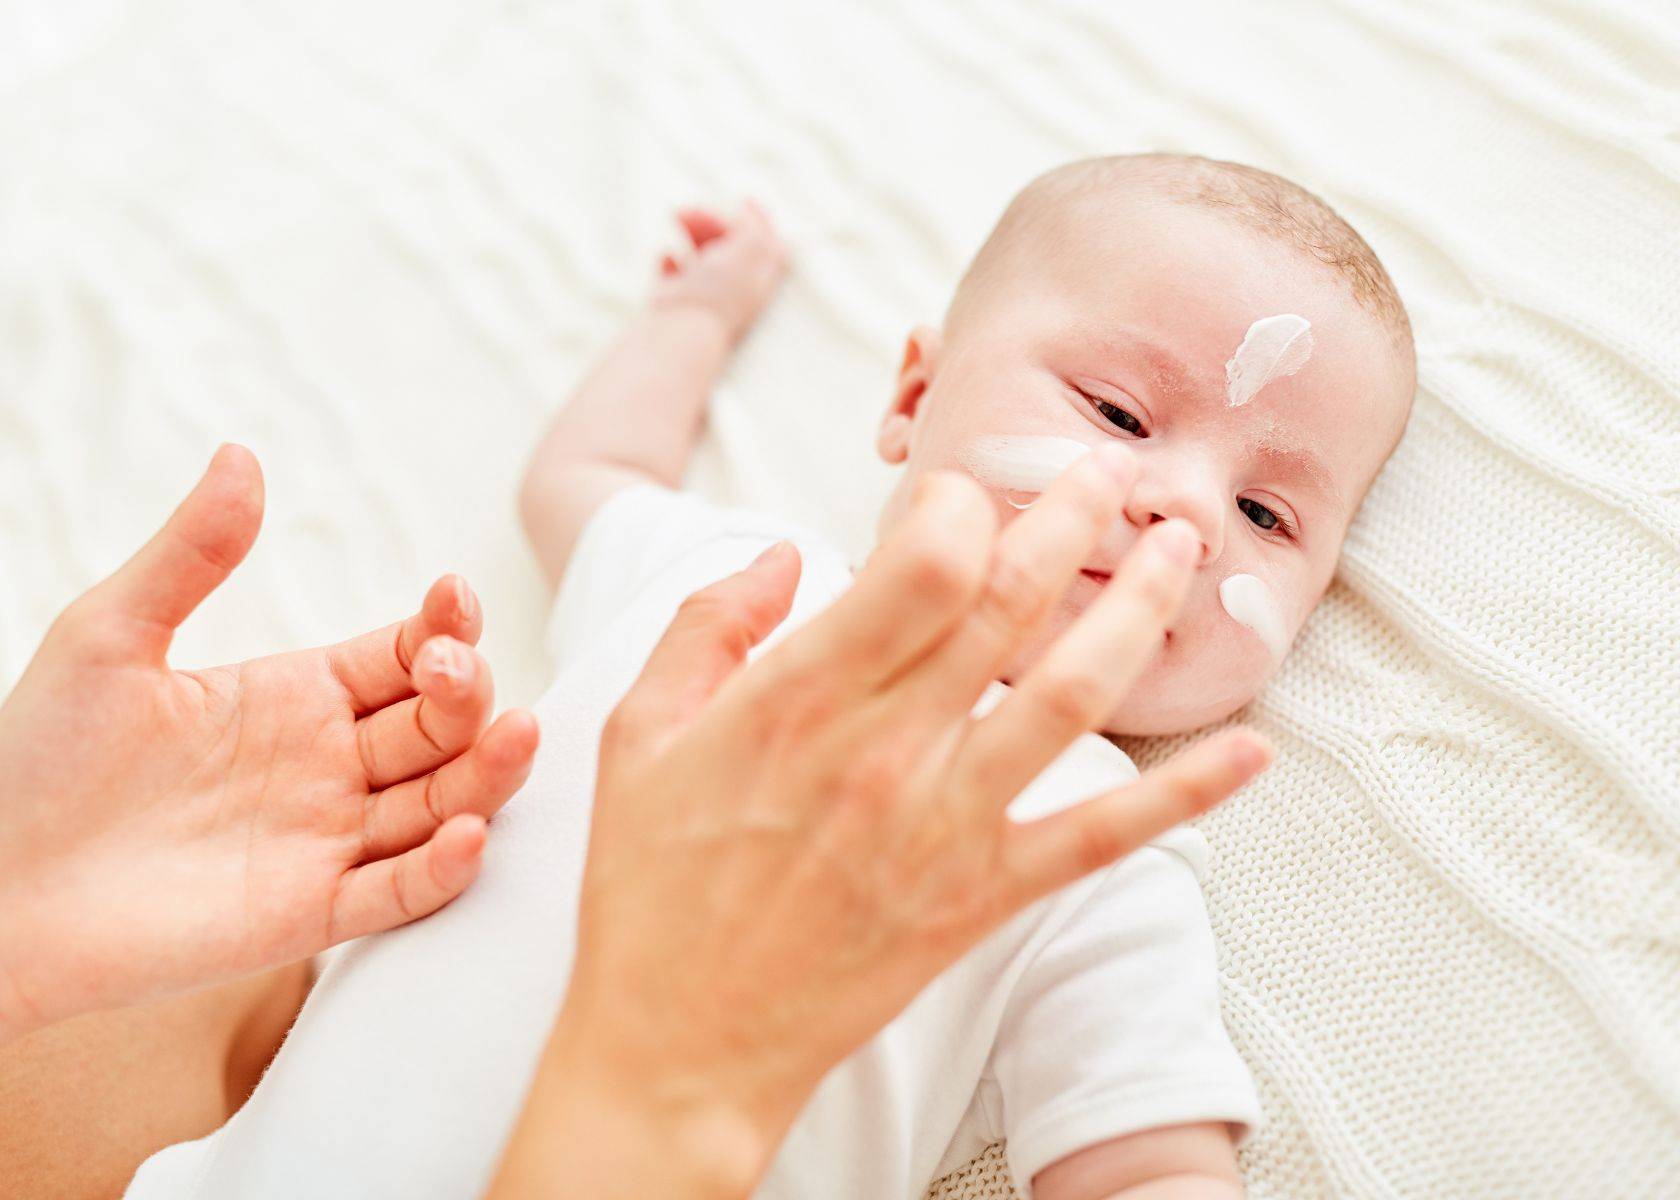 How to Use Caladryl Lotion for Babies